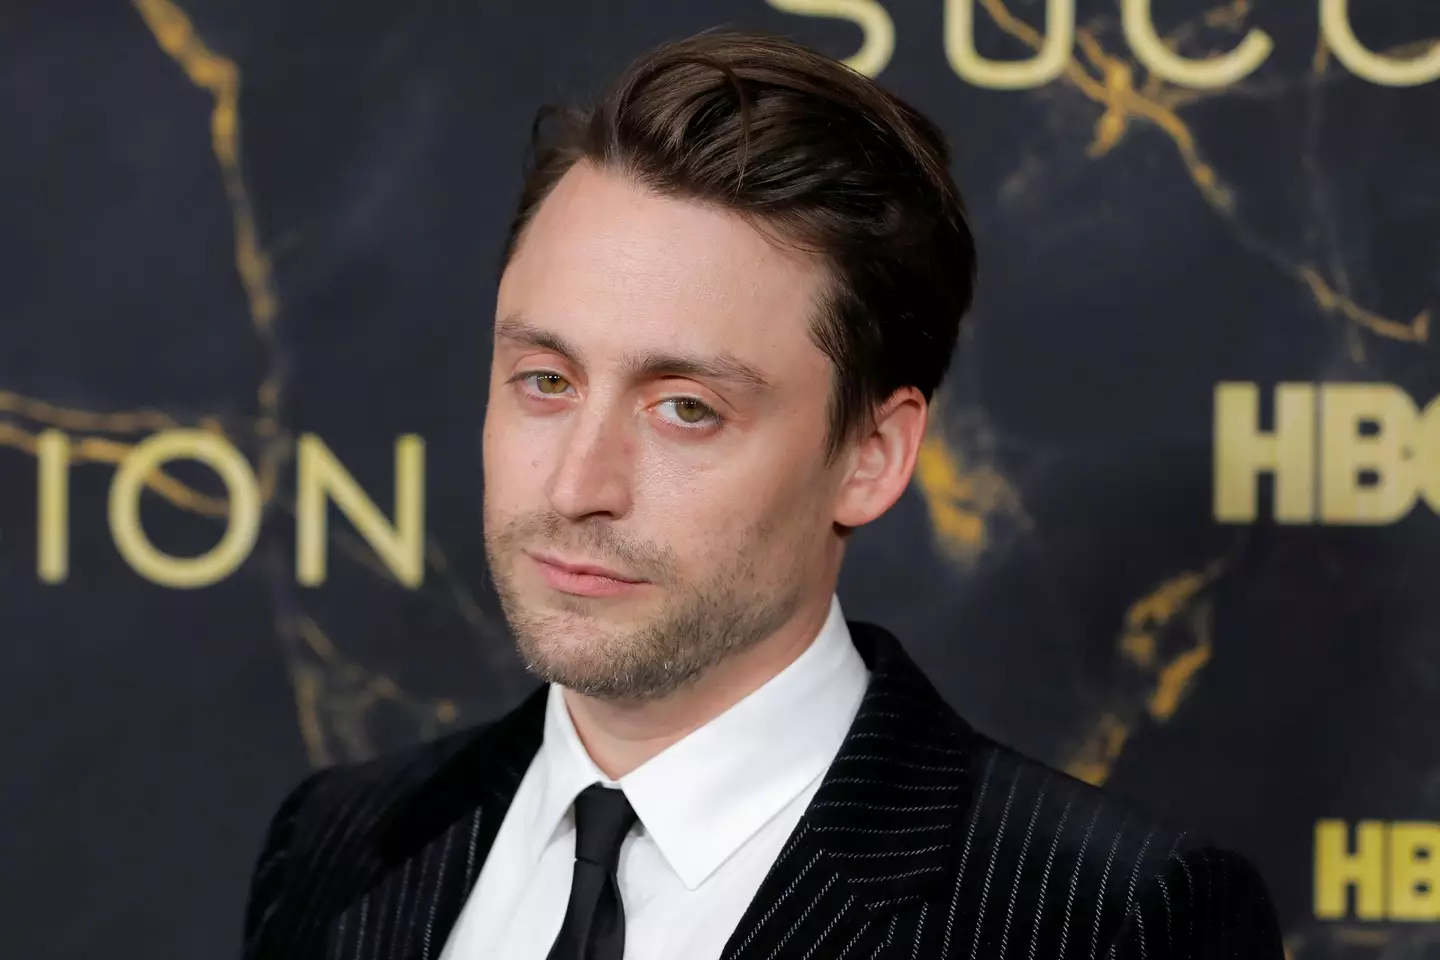 Succession star Kieran Culkin confirmed the news of his brother's expanded family in an interview.